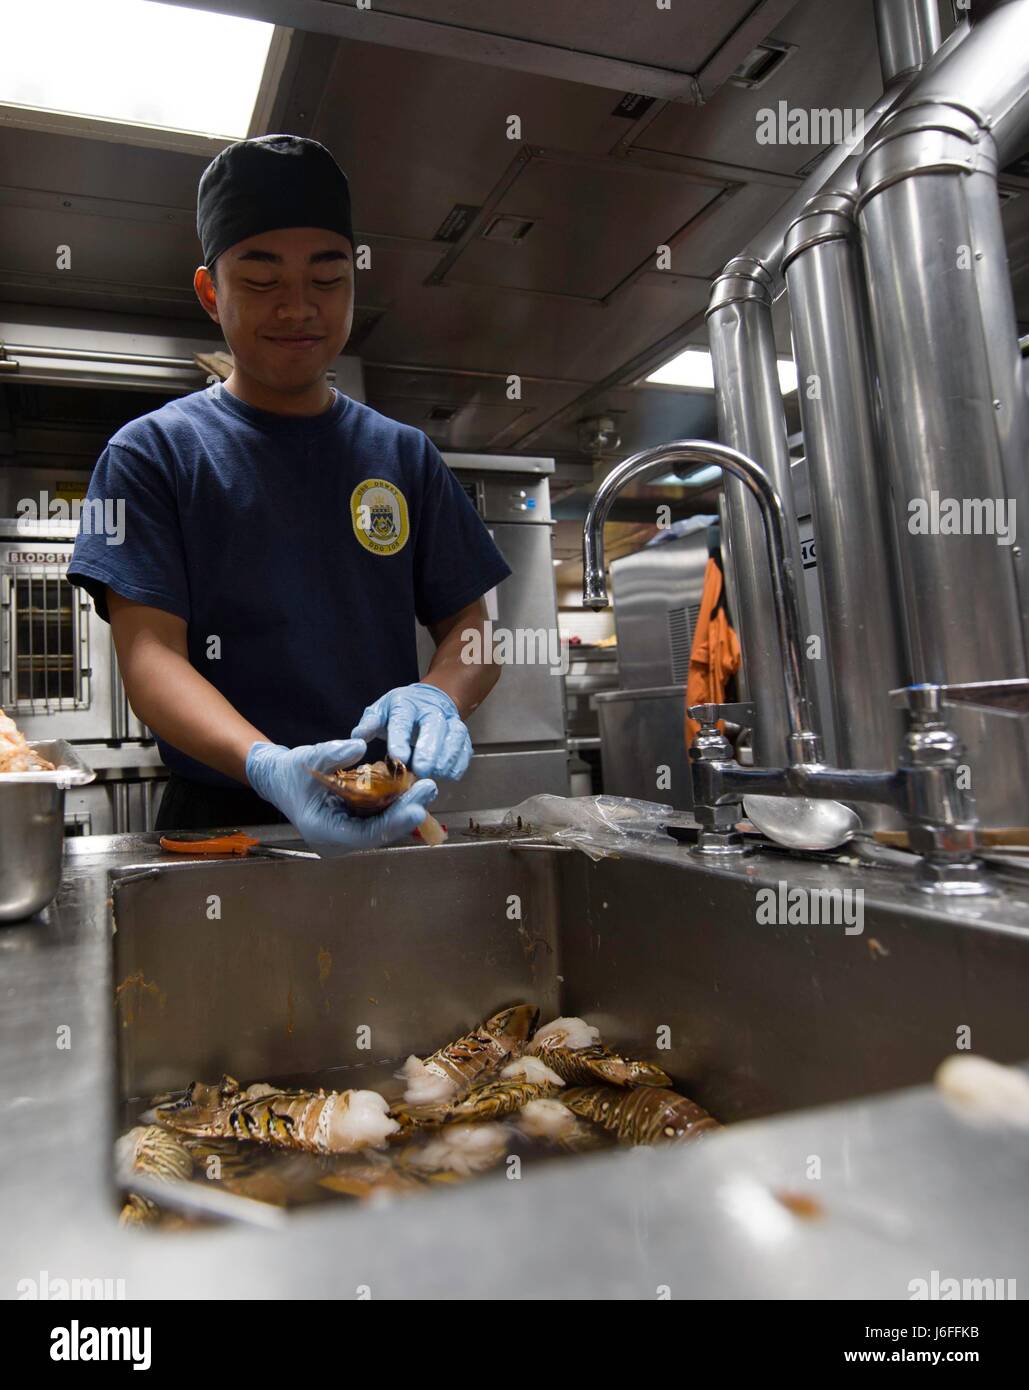 170514-N-BV658-105     SOUTH CHINA SEA(May 14, 2017)   Christianjo Bejec, a native of the Philippines, prepares lobster in the galley aboard the Arleigh Burke-class guided-missile destroyer USS Dewey (DDG 105).  Dewey is part of the Sterett-Dewey Surface Action Group and is the third deploying group operating under the command and control construct called 3rd Fleet Forward.  The U.S. 3rd Fleet operating forward offers additional options to the Pacific Fleet commander by leveraging the capabilities of 3rd and 7th Fleets. (U.S. Navy Photo By Mass Communication Specialist 3rd Class Kryzentia Weie Stock Photo